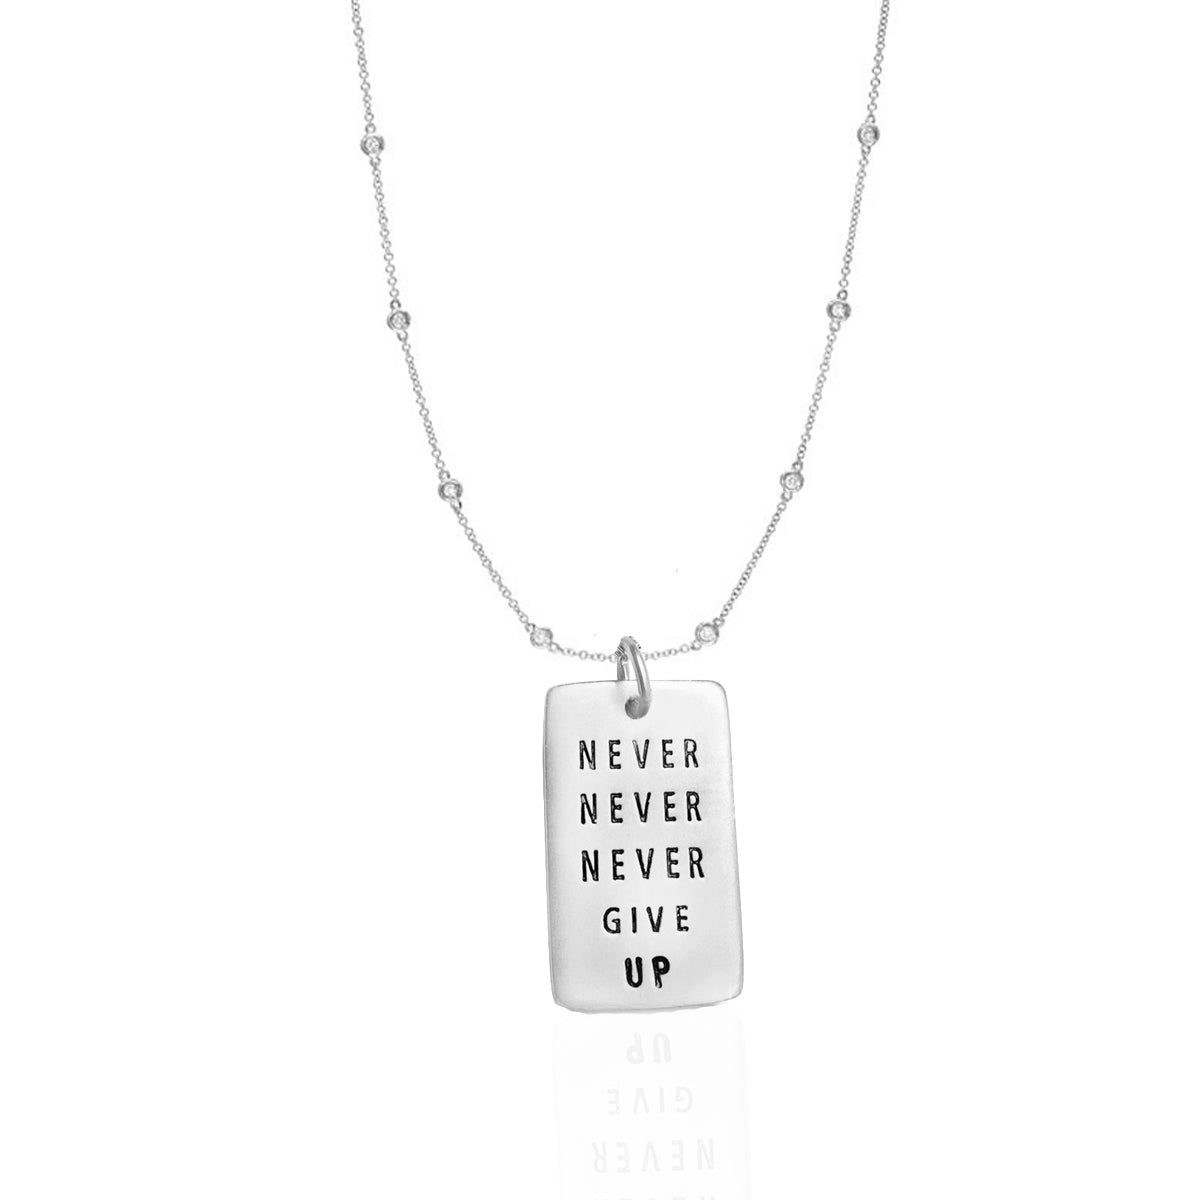 Never Give Up Inspirational Dog Tag Necklace with Crystals